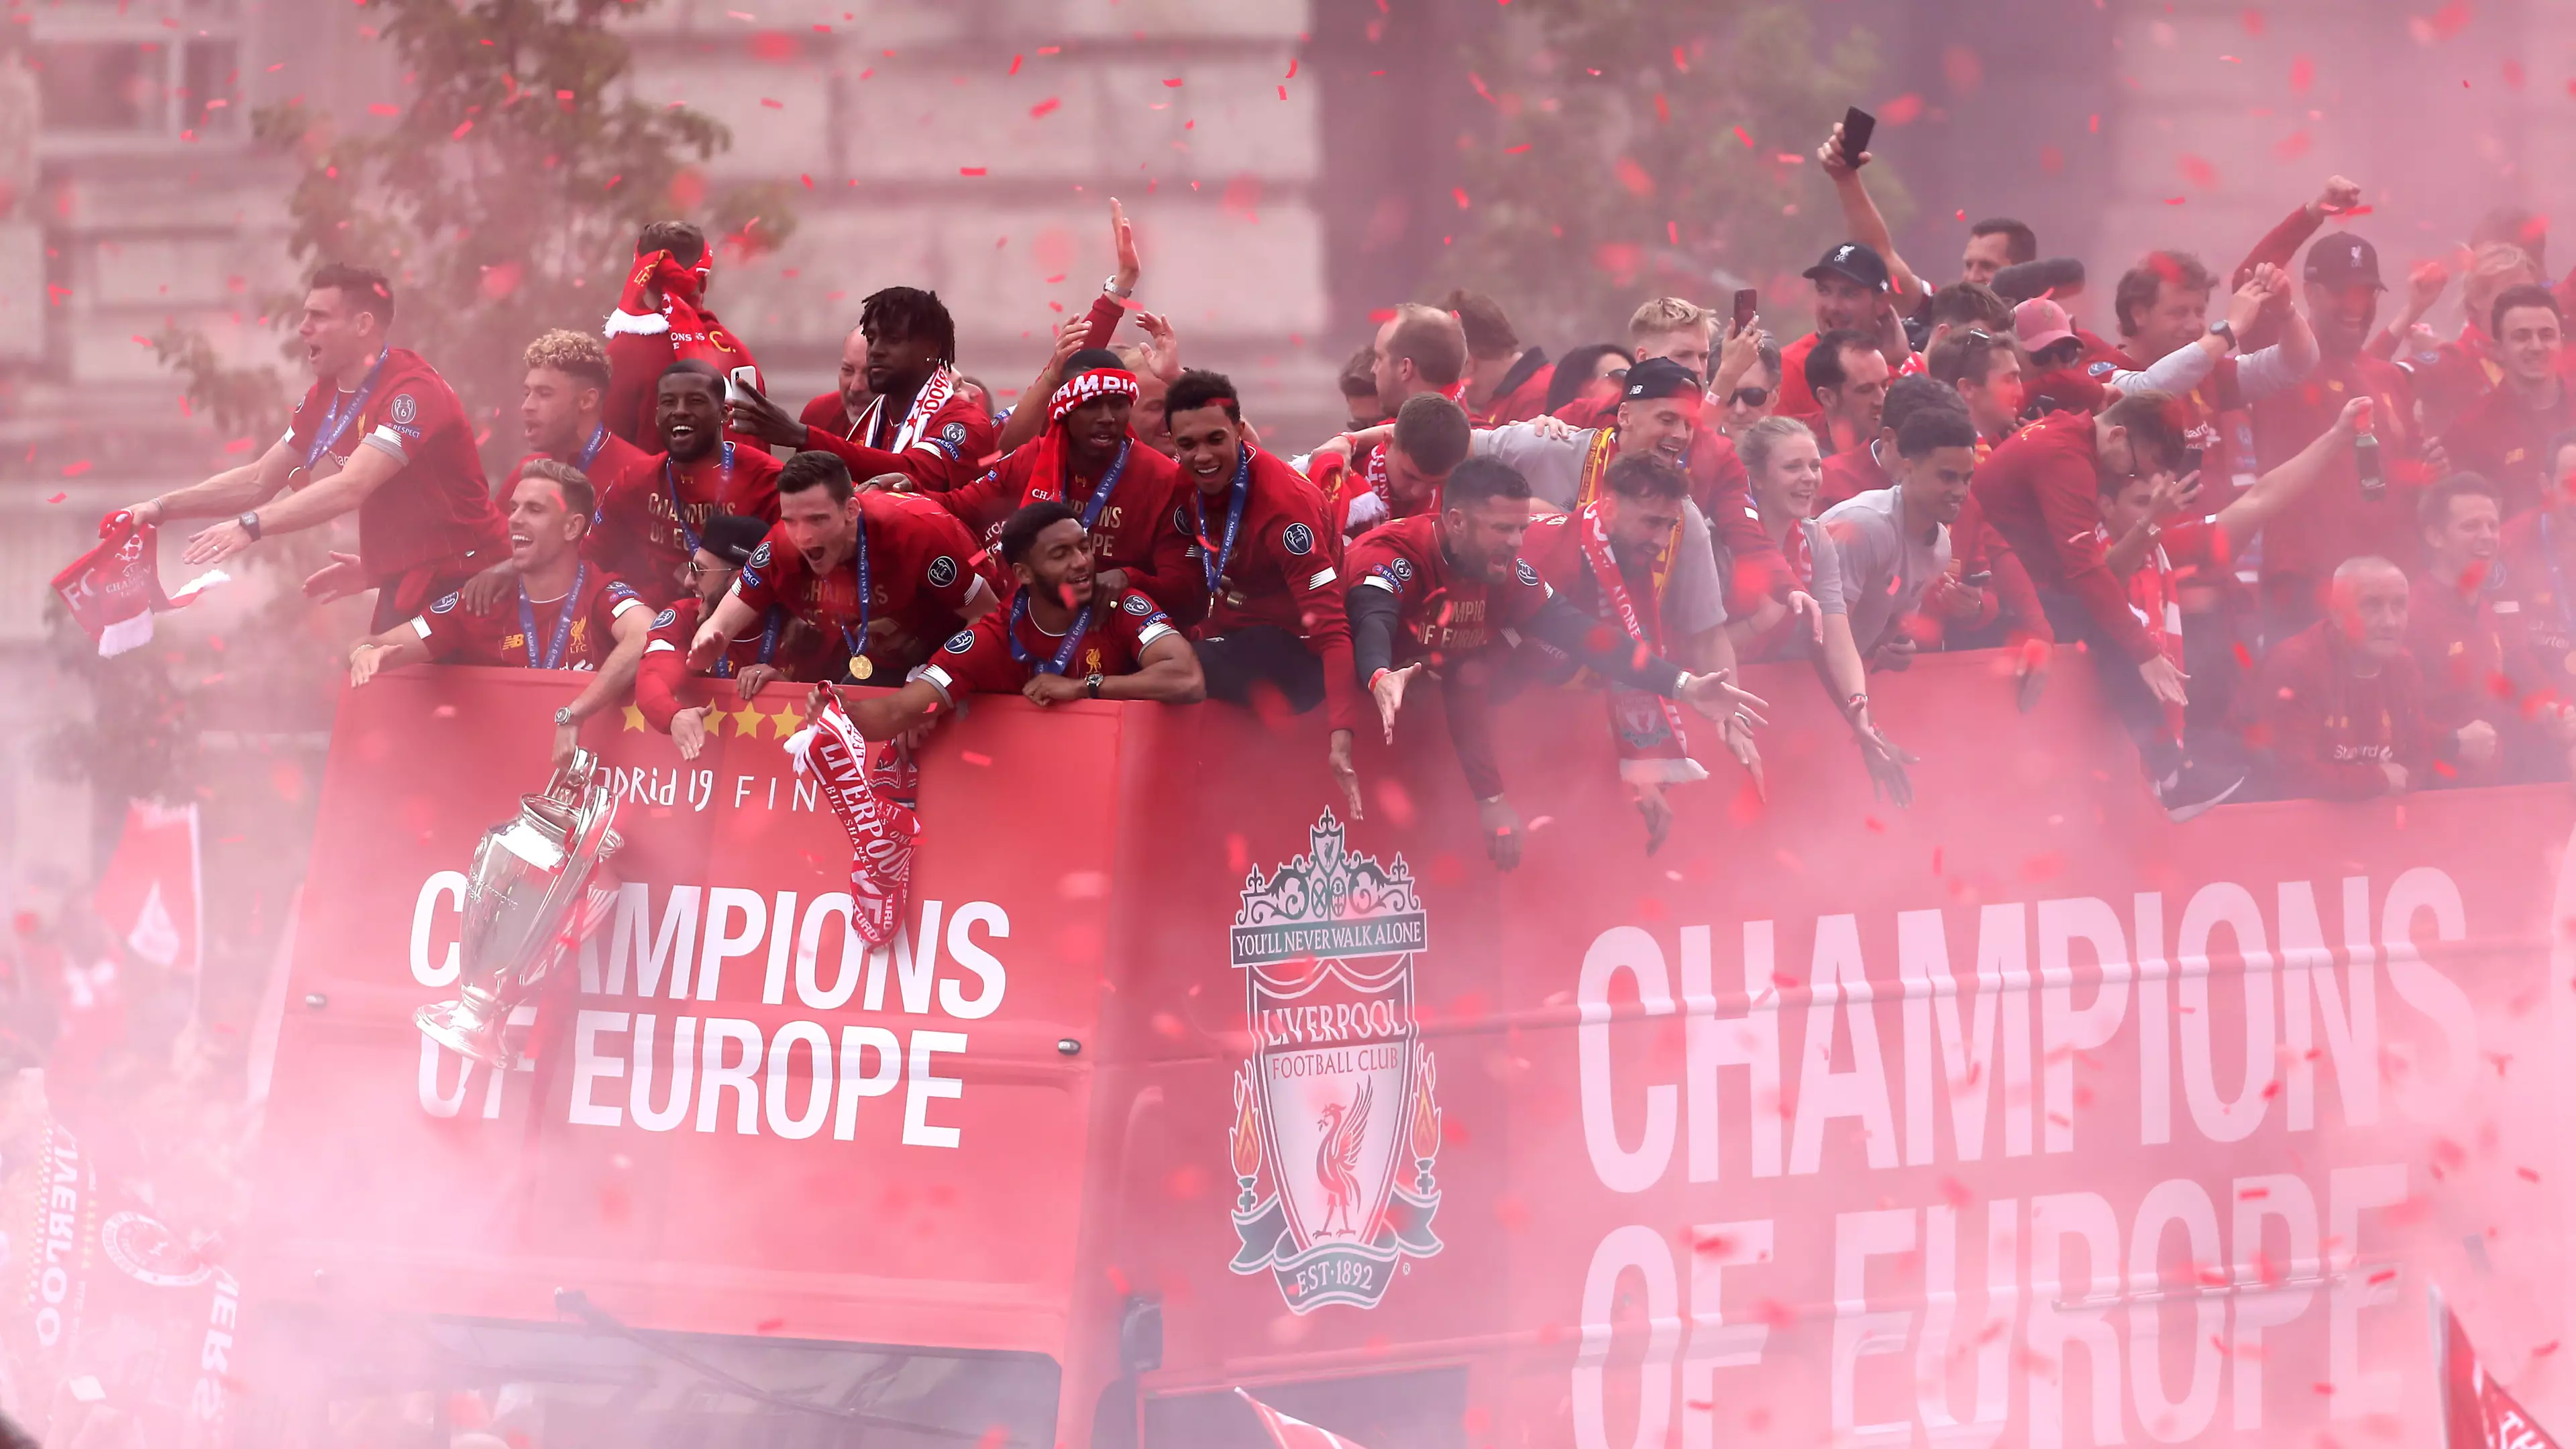 Liverpool's Enormous Fixture List For The 2019/20 Season Is Ridiculous